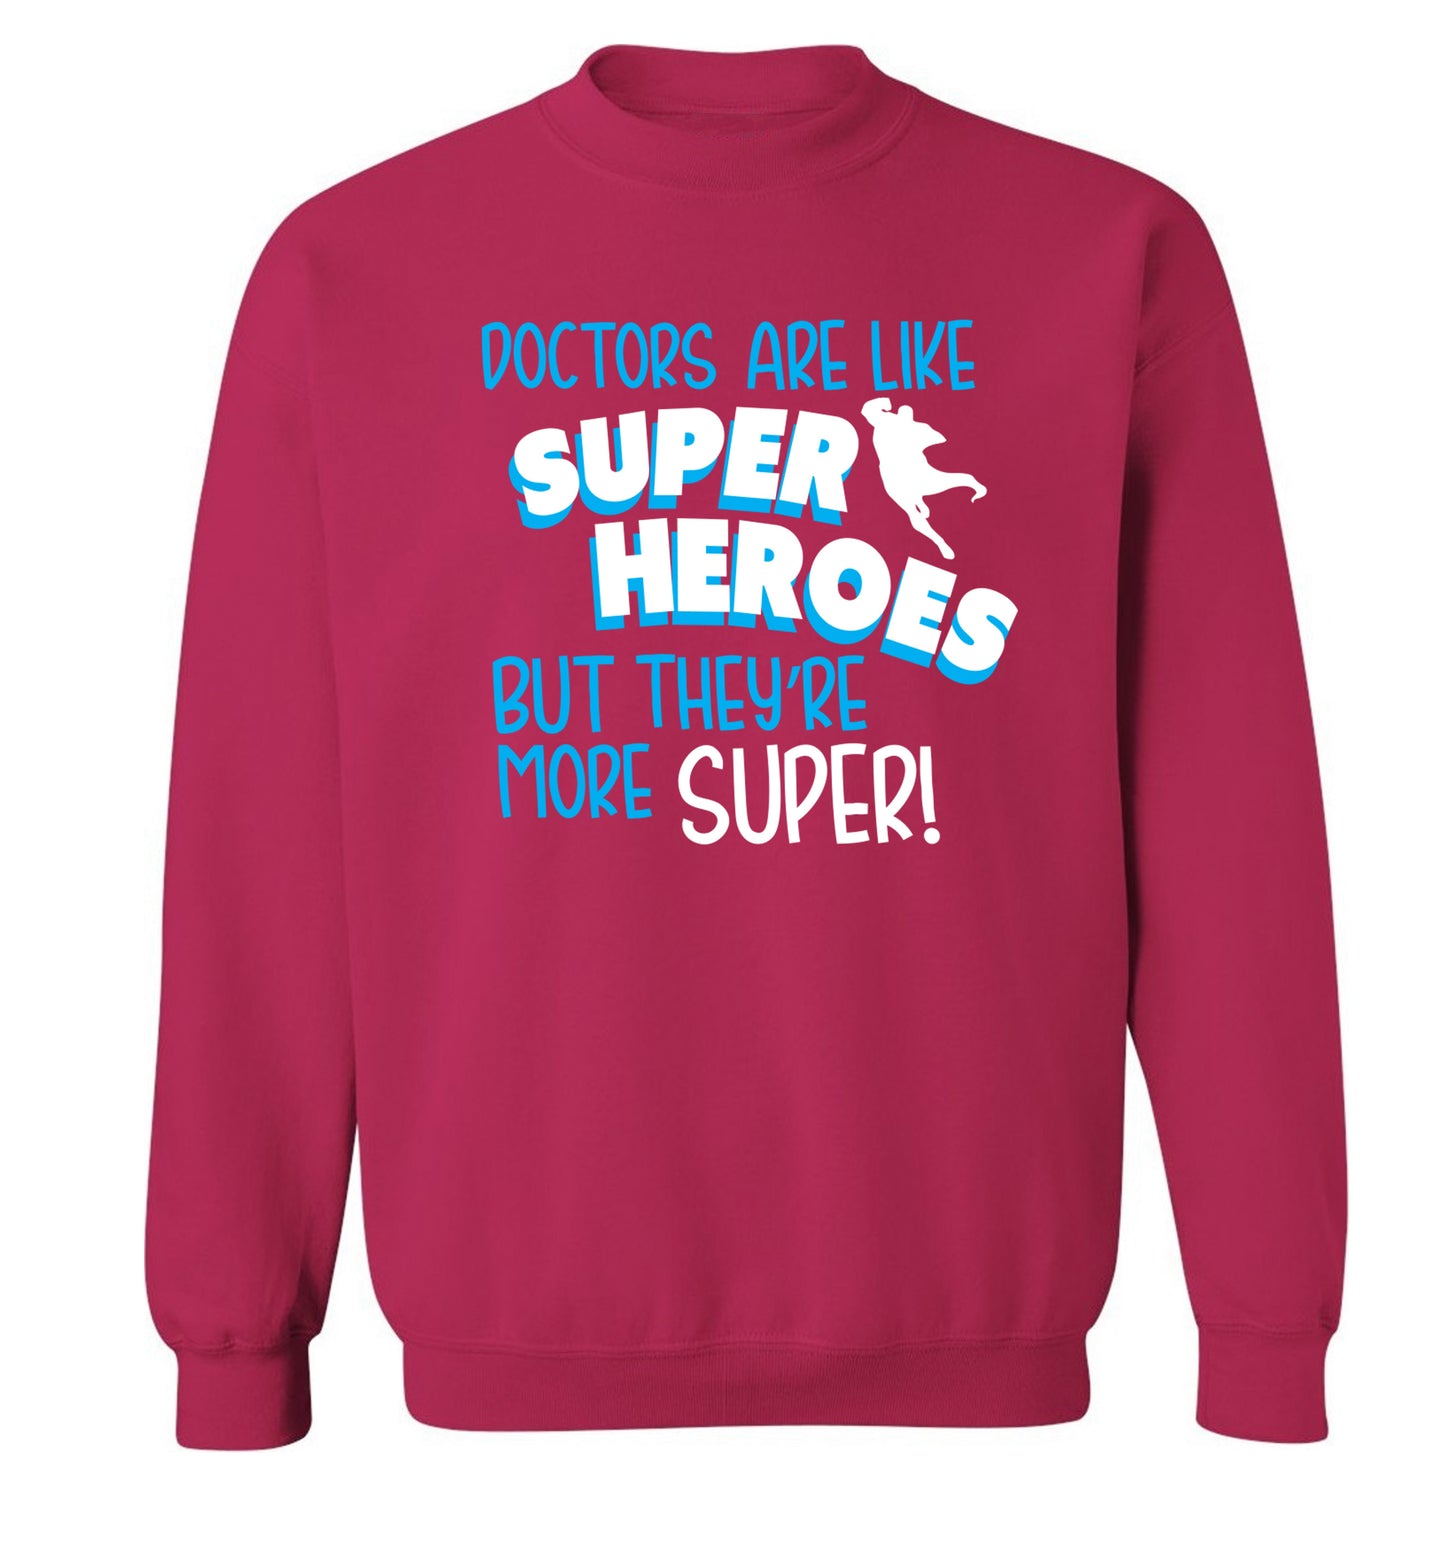 Doctors are like superheros but they're more super Adult's unisex pink Sweater 2XL